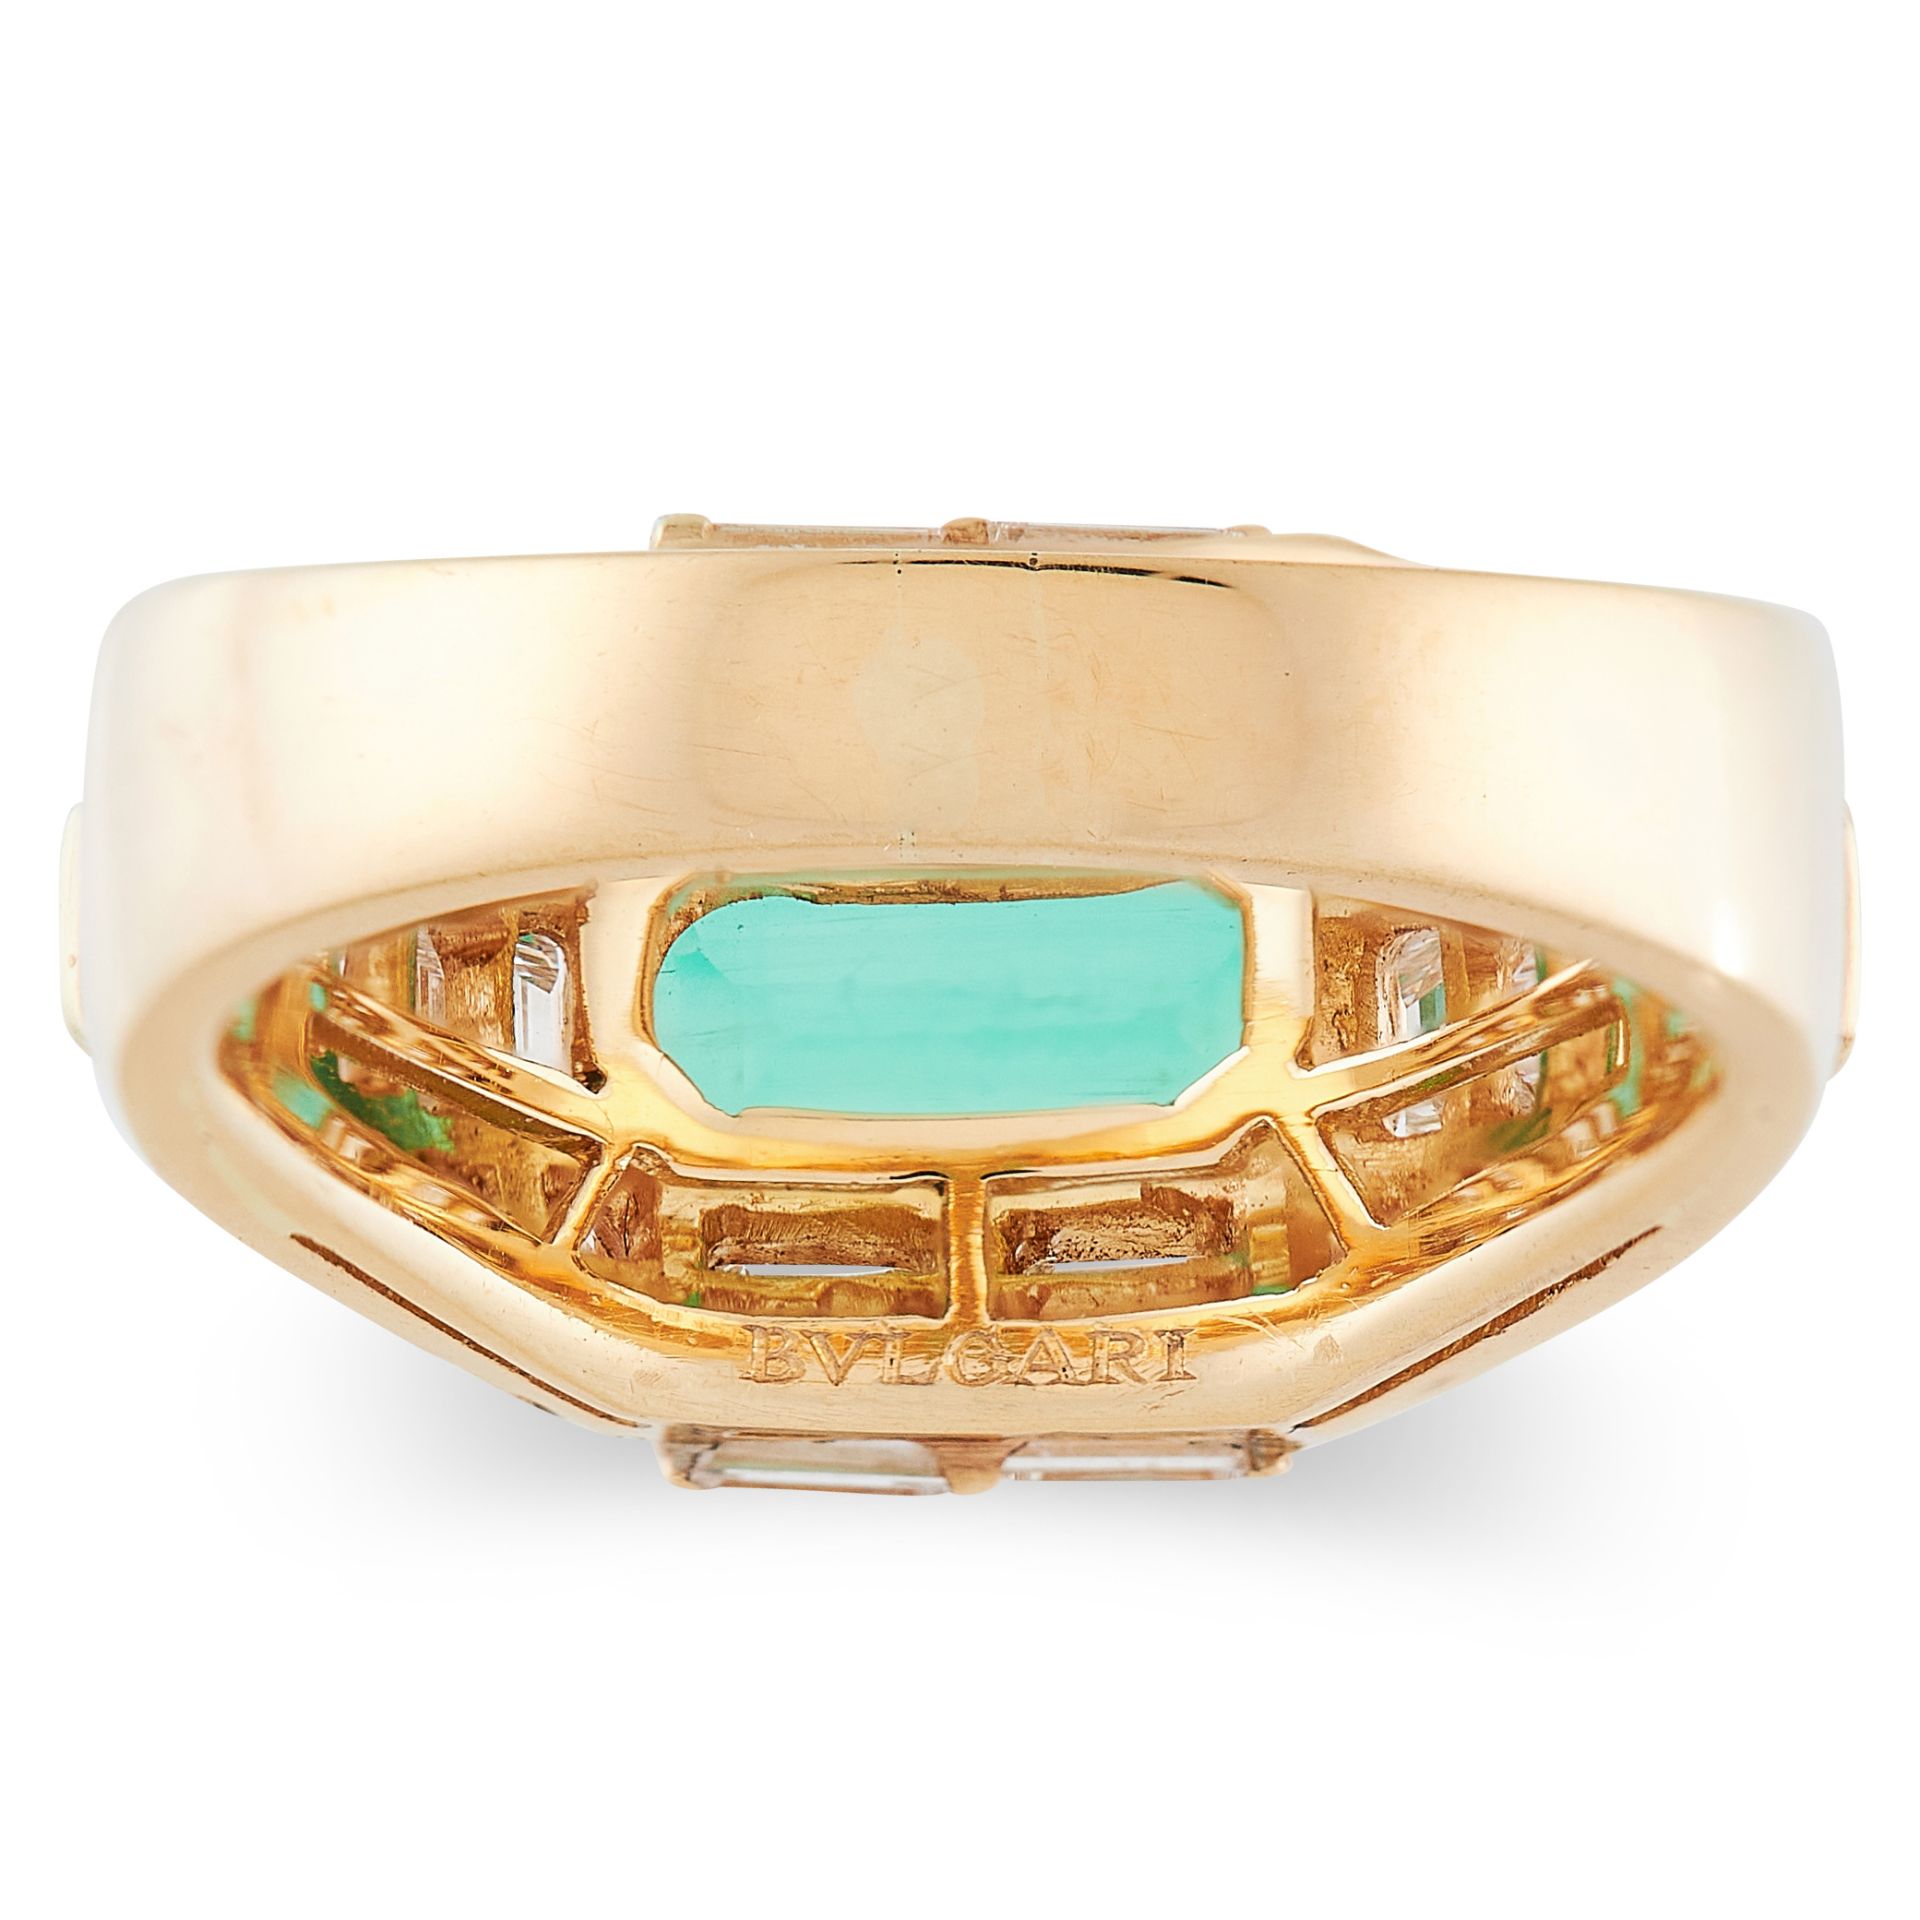 A COLOMBIAN EMERALD AND DIAMOND TROMBINO RING, BULGARI in 18ct yellow gold, set with an emerald - Image 3 of 3